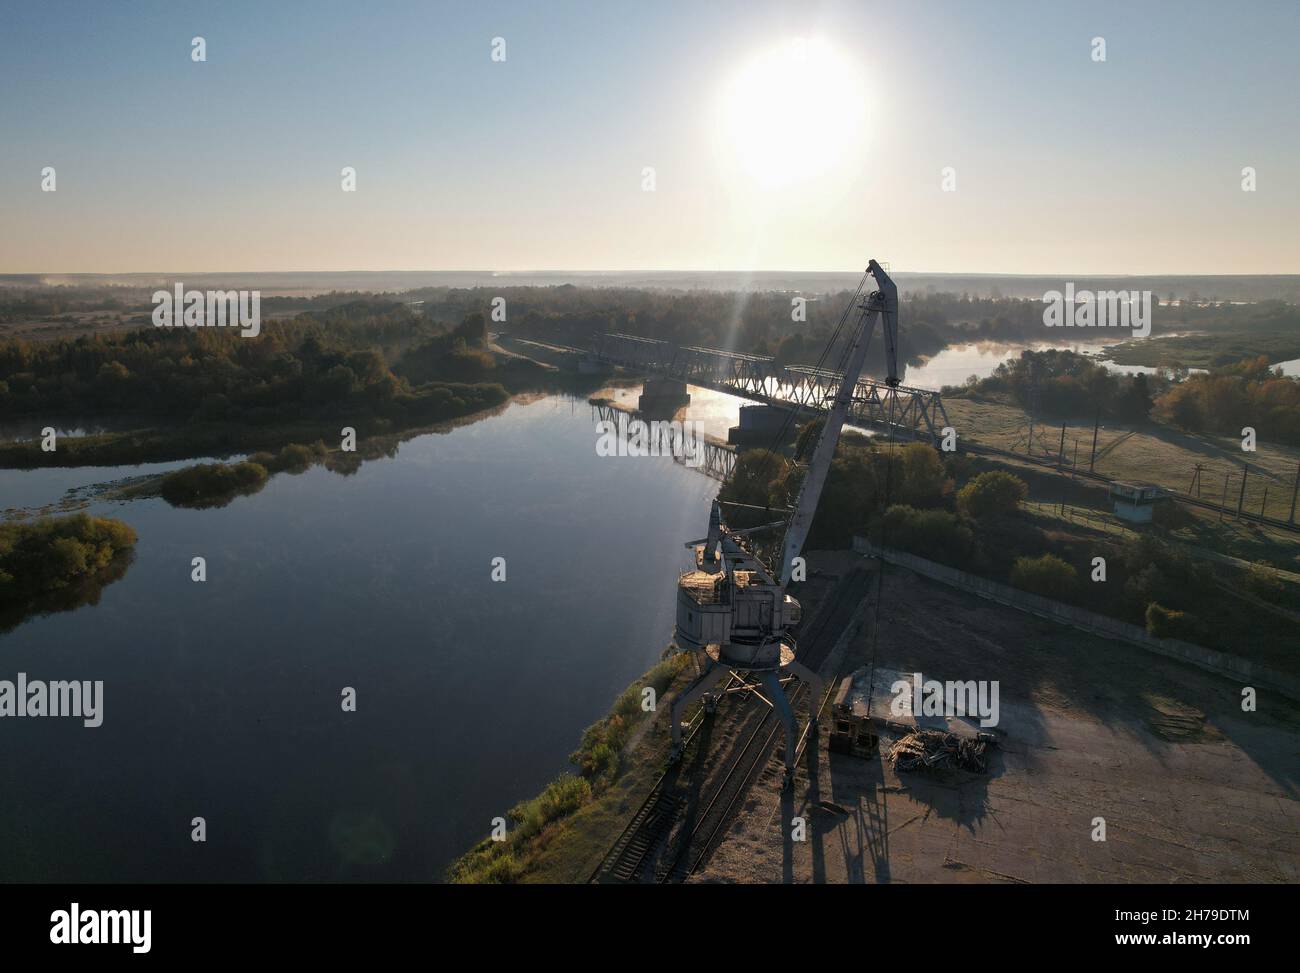 Inactive port crane on the background of a river and a railway bridge at dawn. Stock Photo